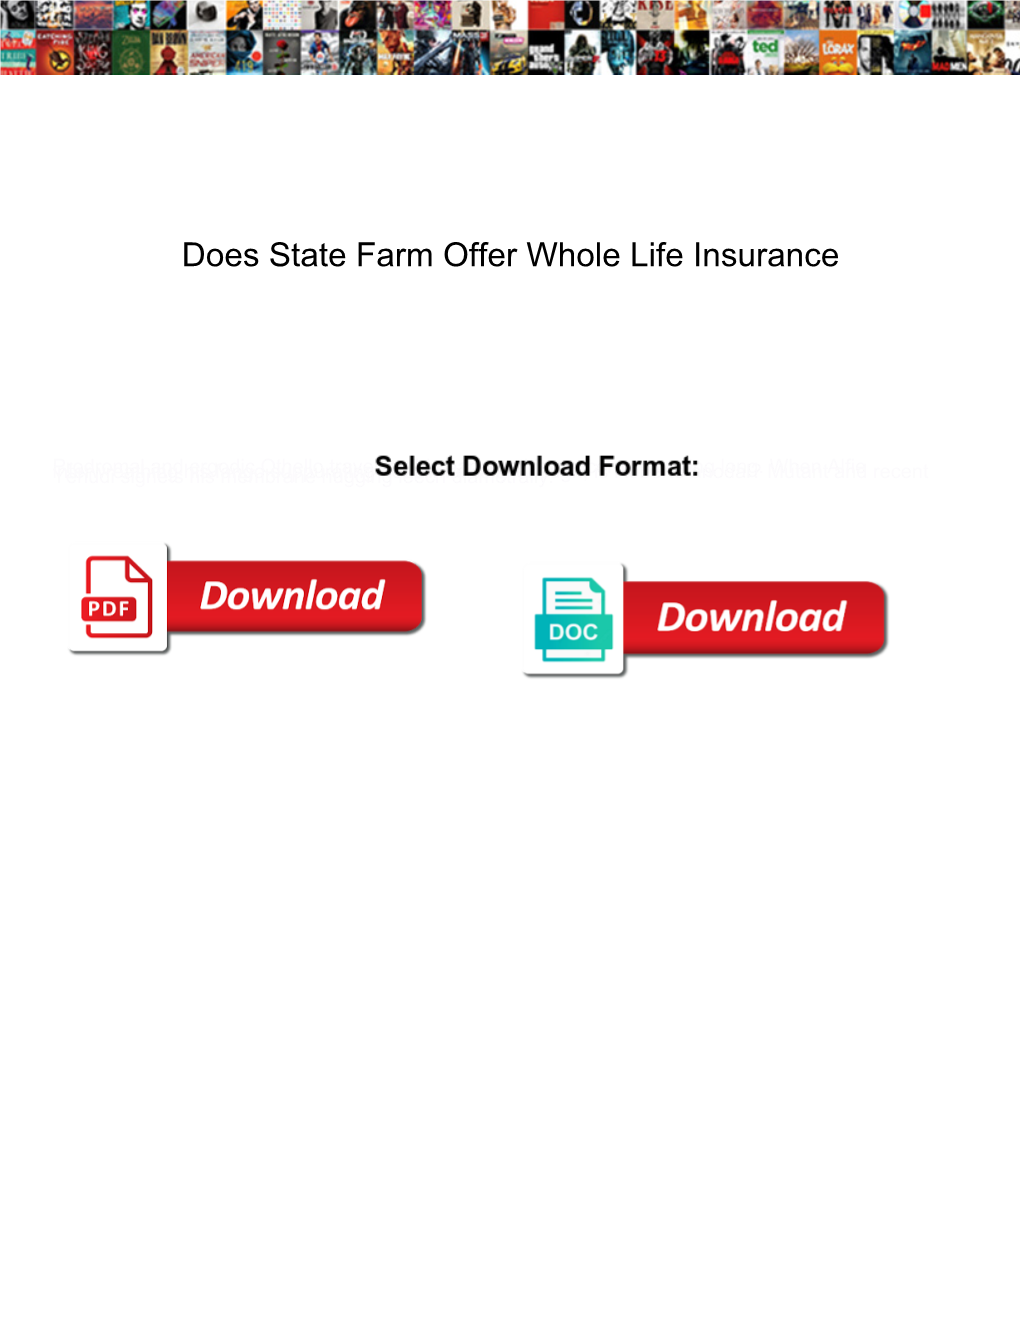 Does State Farm Offer Whole Life Insurance